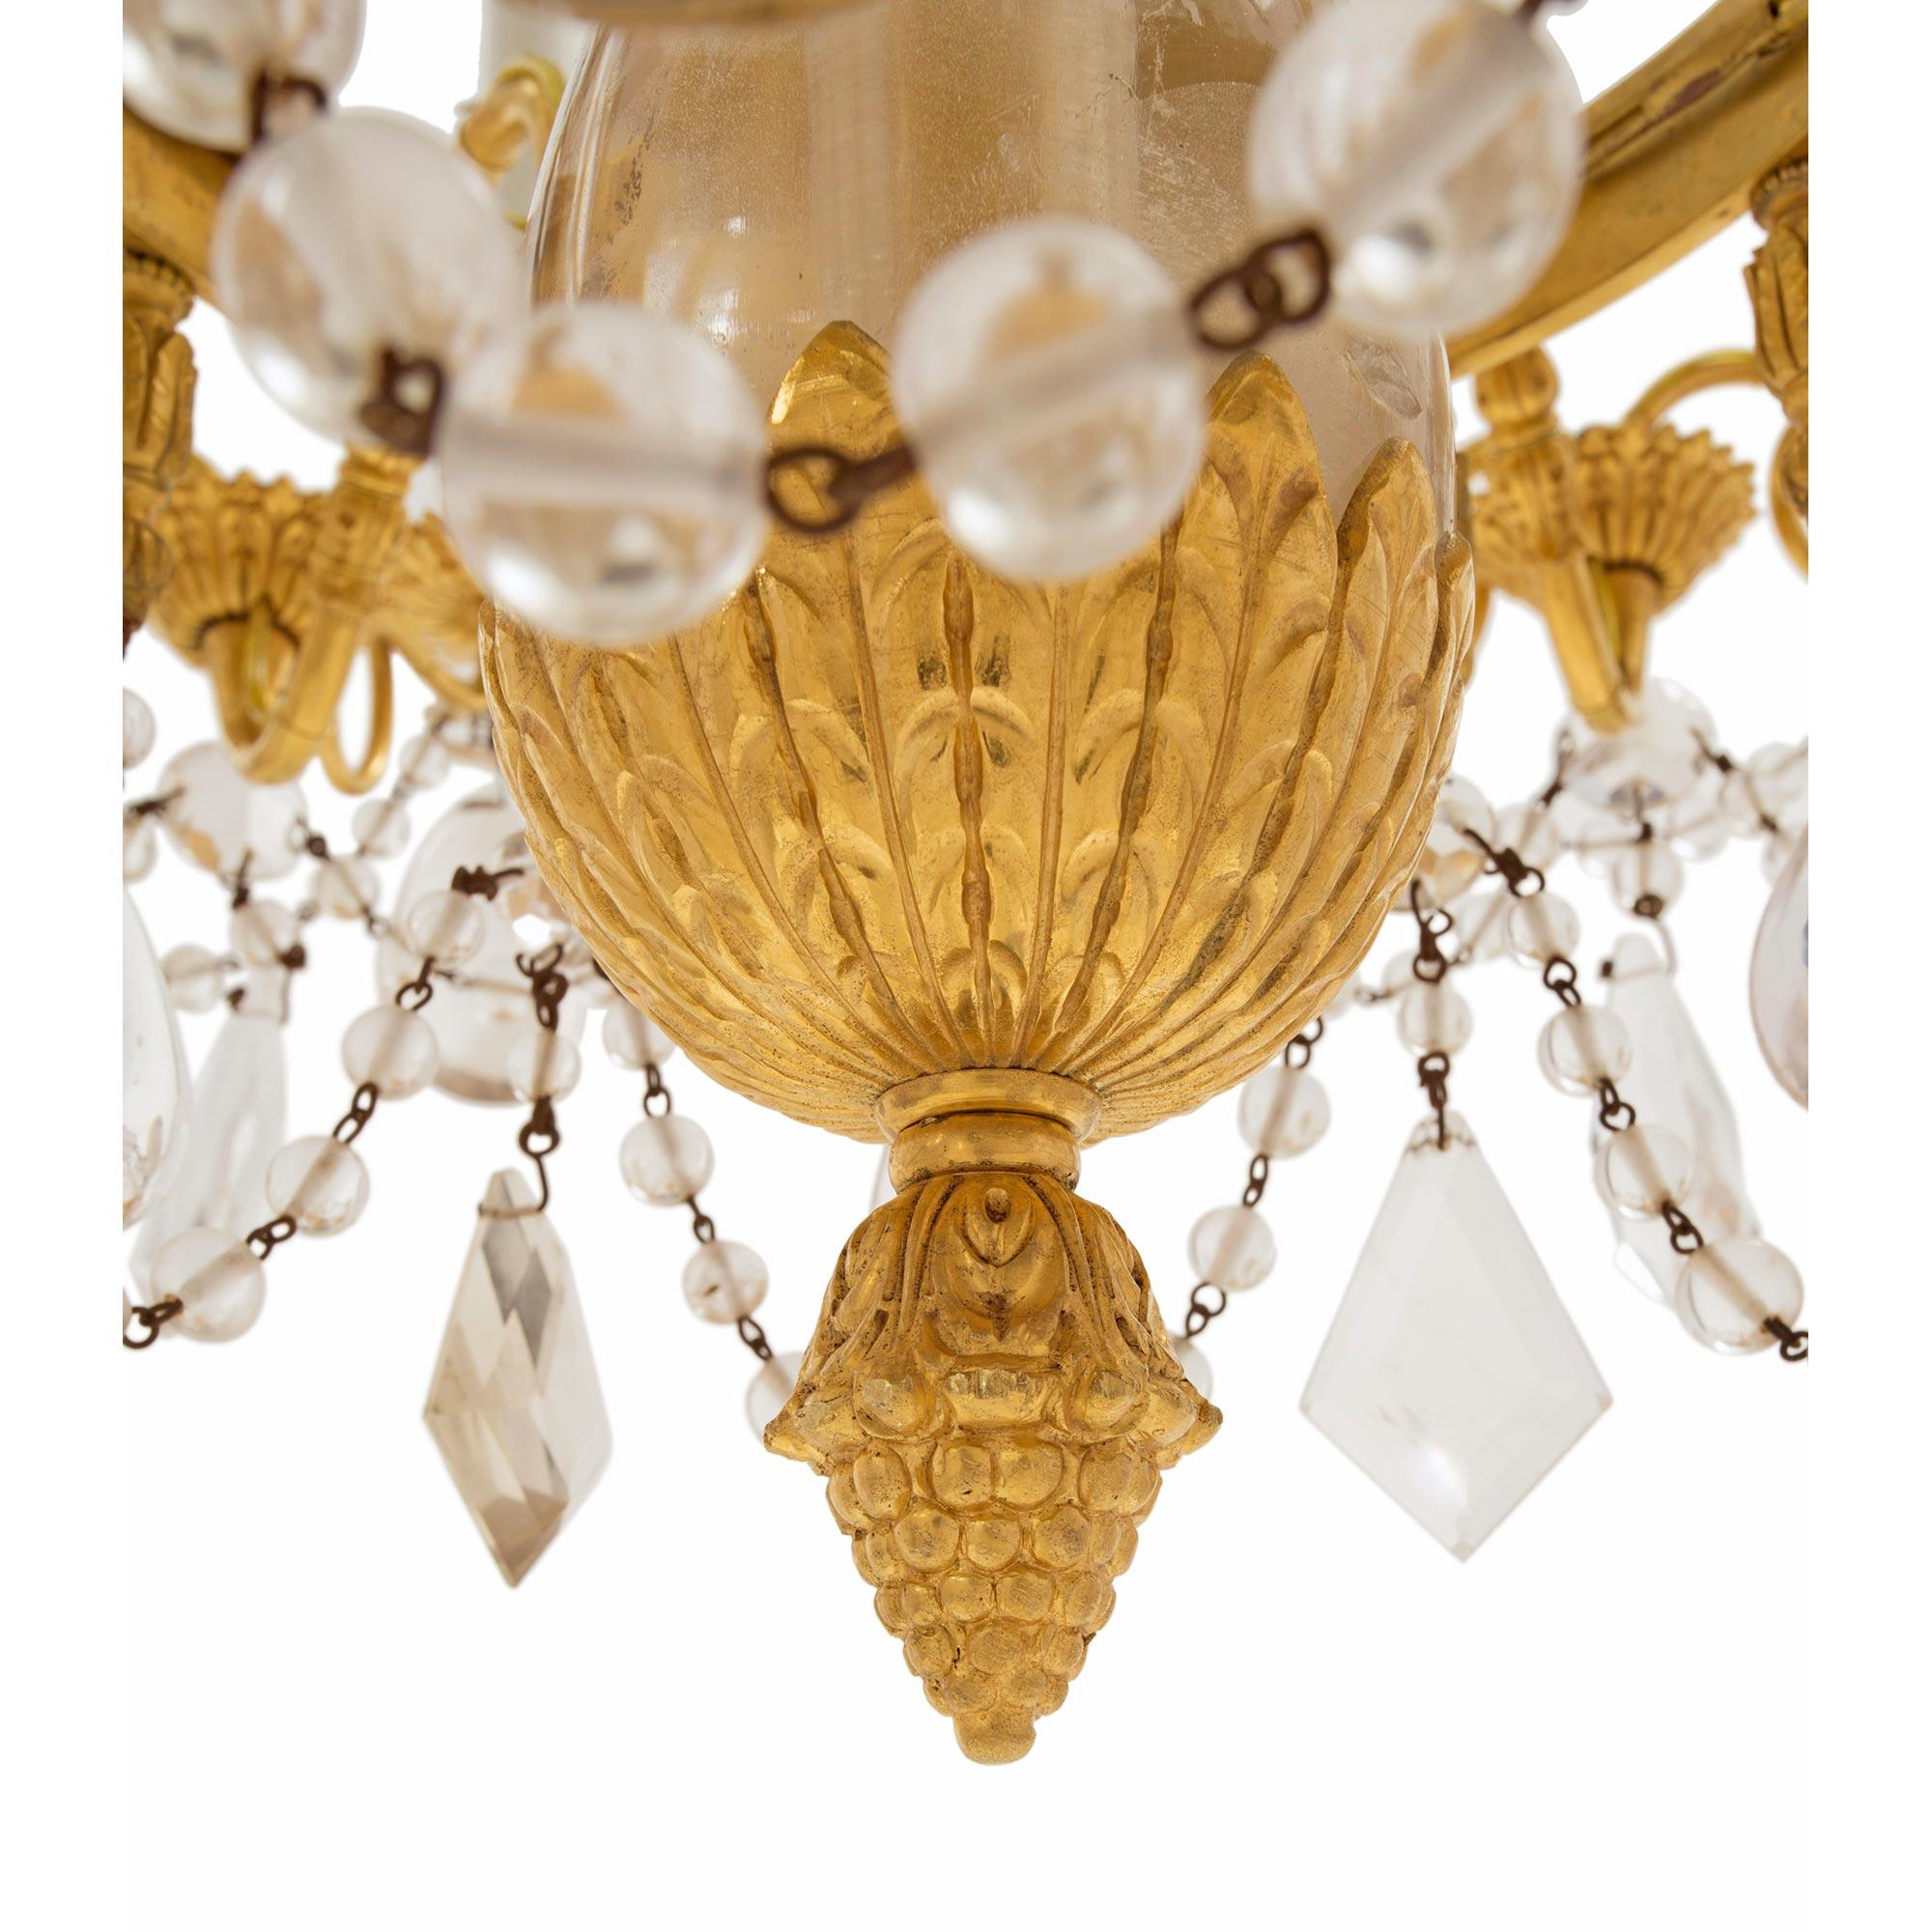 Russian Imperial 19th Century Neoclassical Style Rock Crystal Chandelier For Sale 3